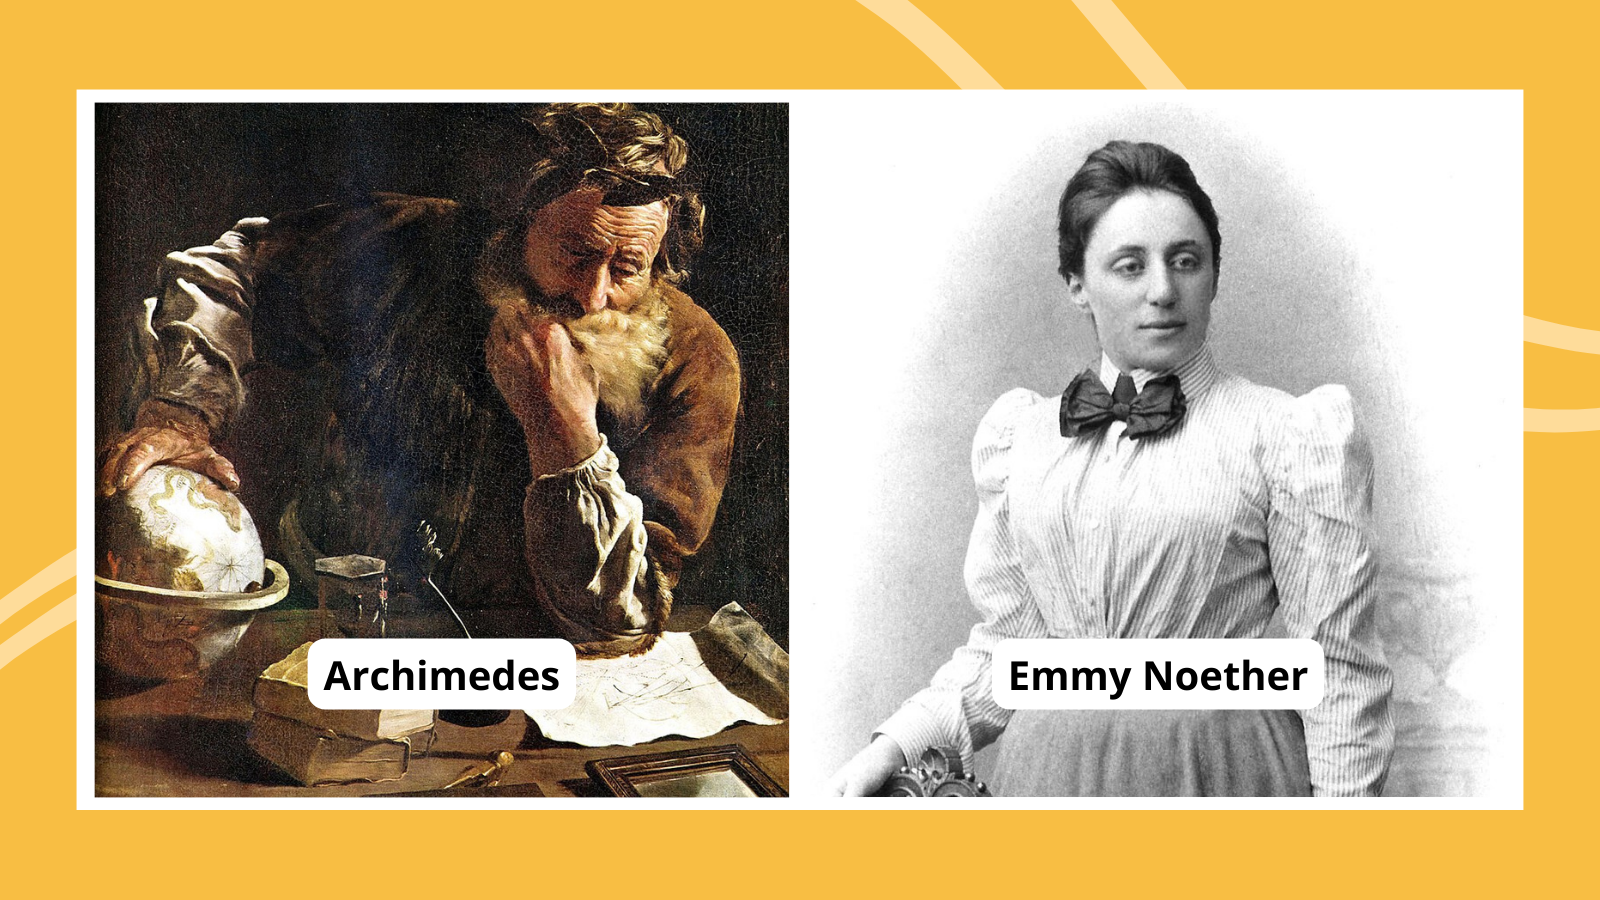 Archimedes and Emmy Noether famous mathematicians